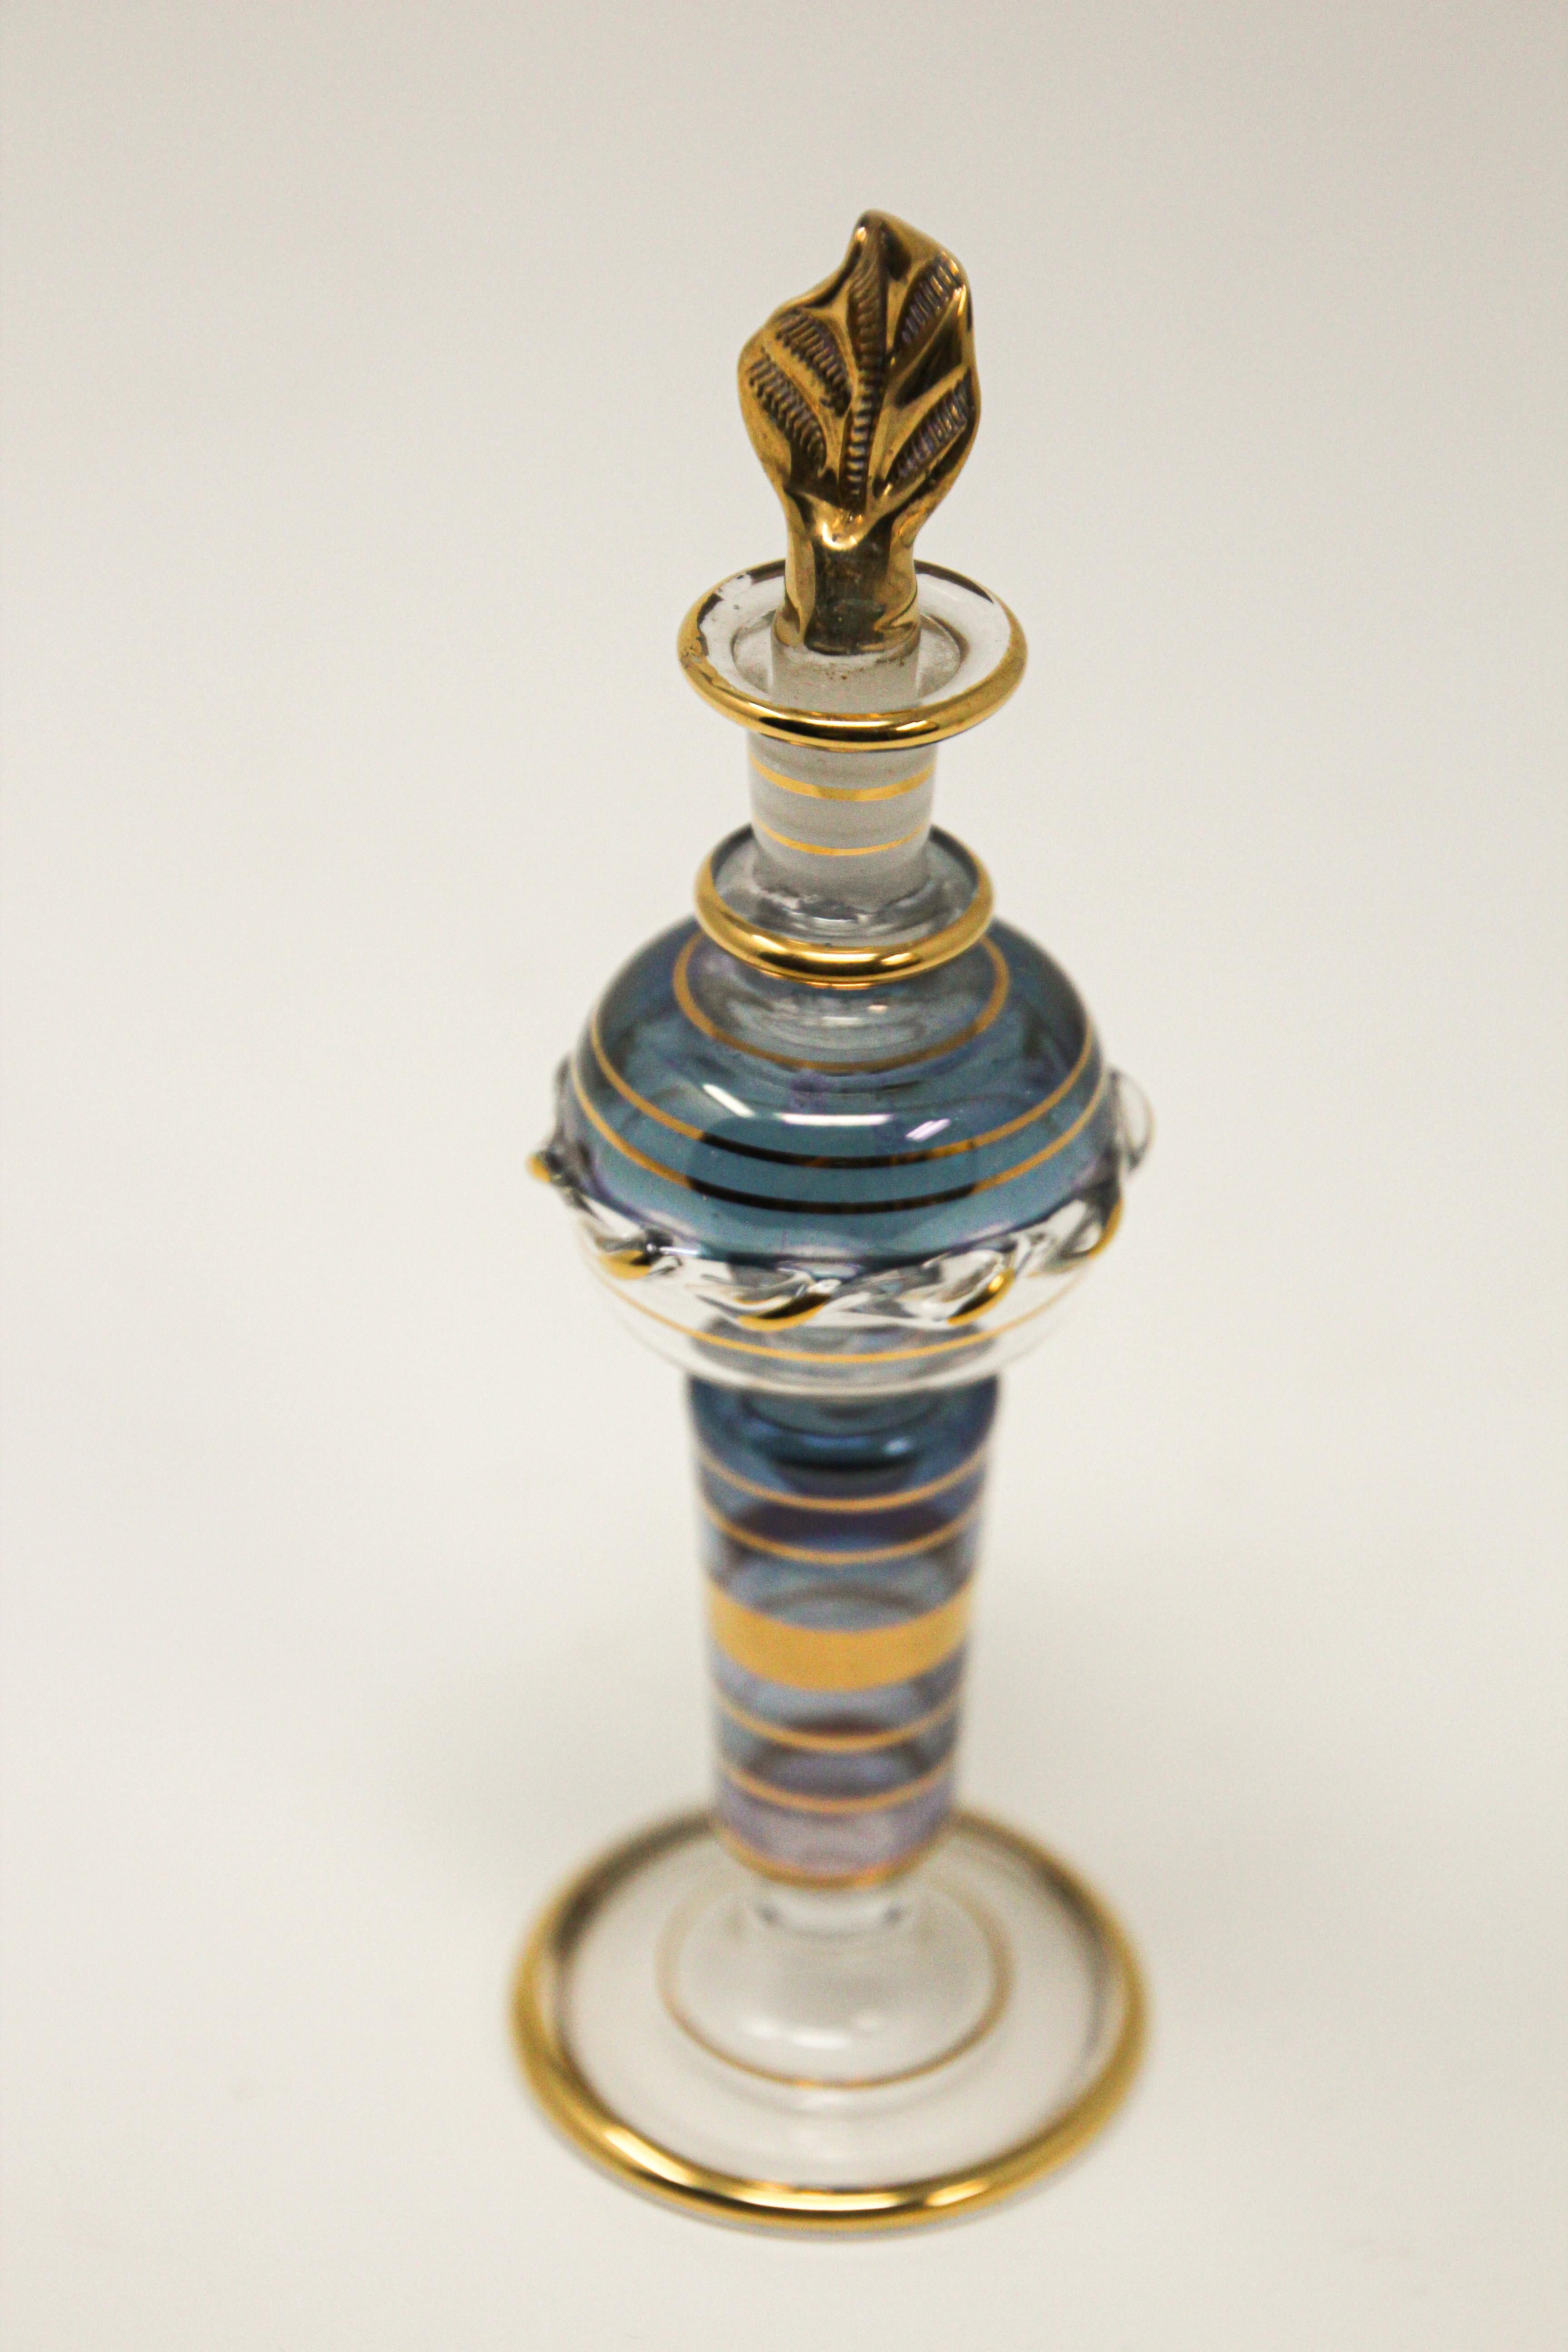 Handcrafted Moroccan Moorish gilt glass perfume bottle.
Hand blown glass perfume bottle gilded with 24-karat gold hand painted designs with beautiful translucent blue colors in Moser style.
Uniquely shaped leaf stopper has a glass applicator rod to